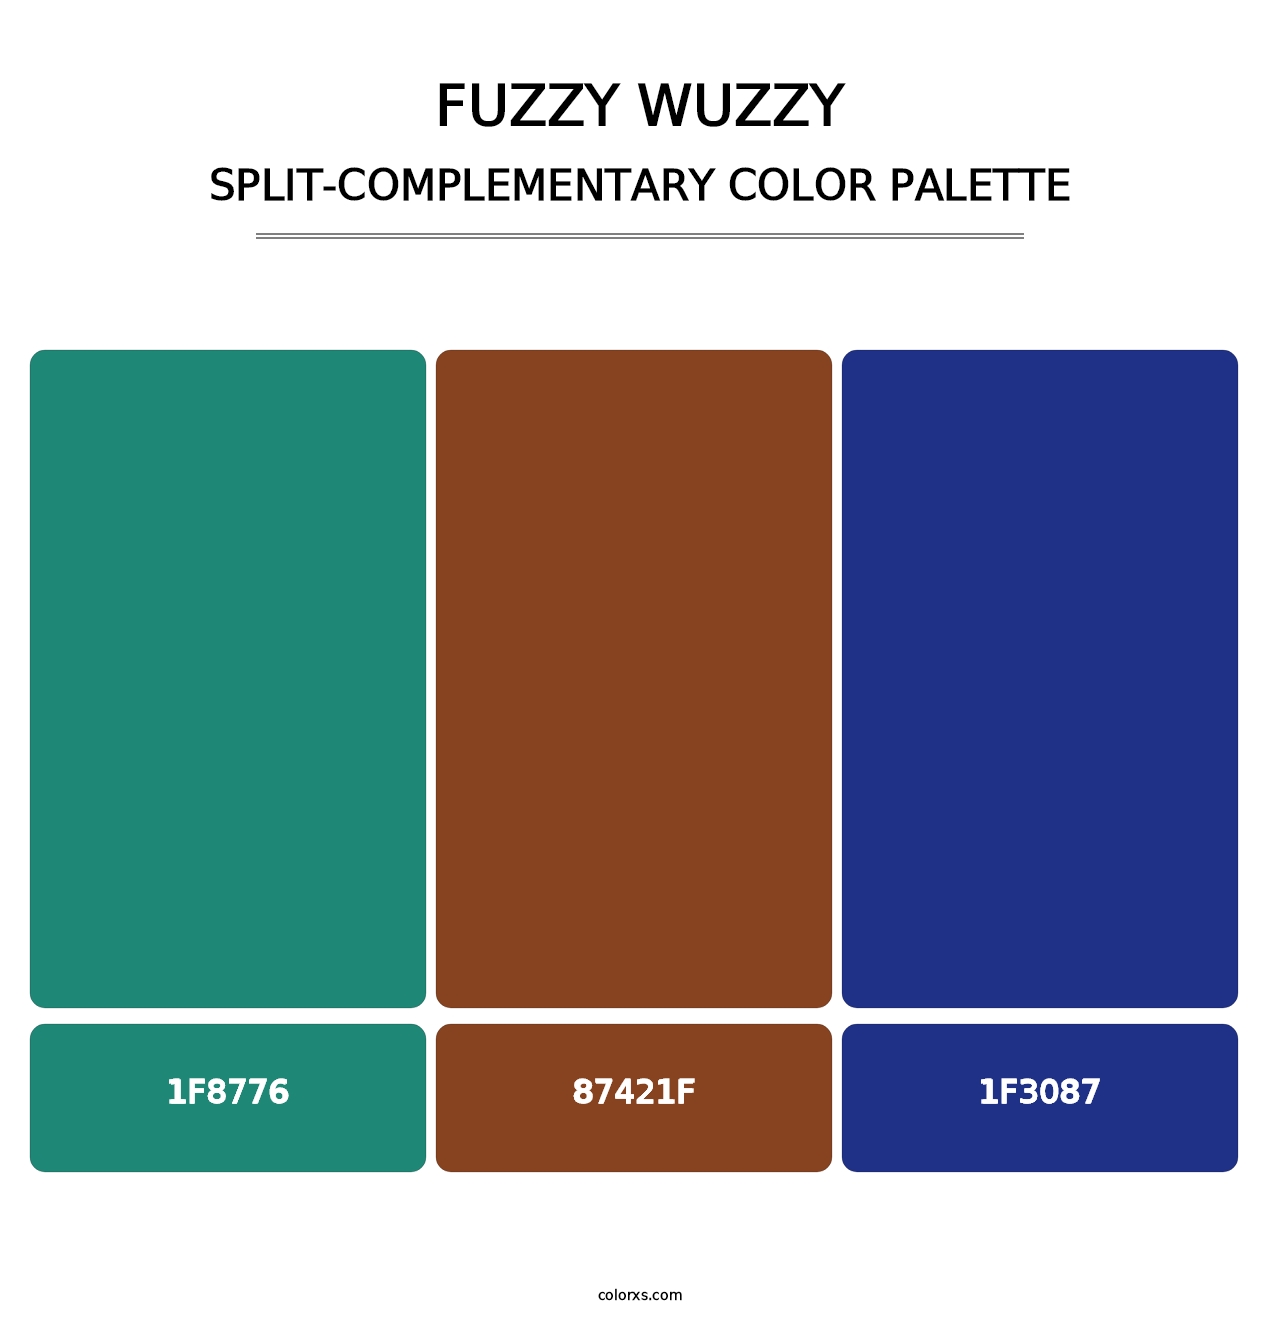 Fuzzy Wuzzy - Split-Complementary Color Palette